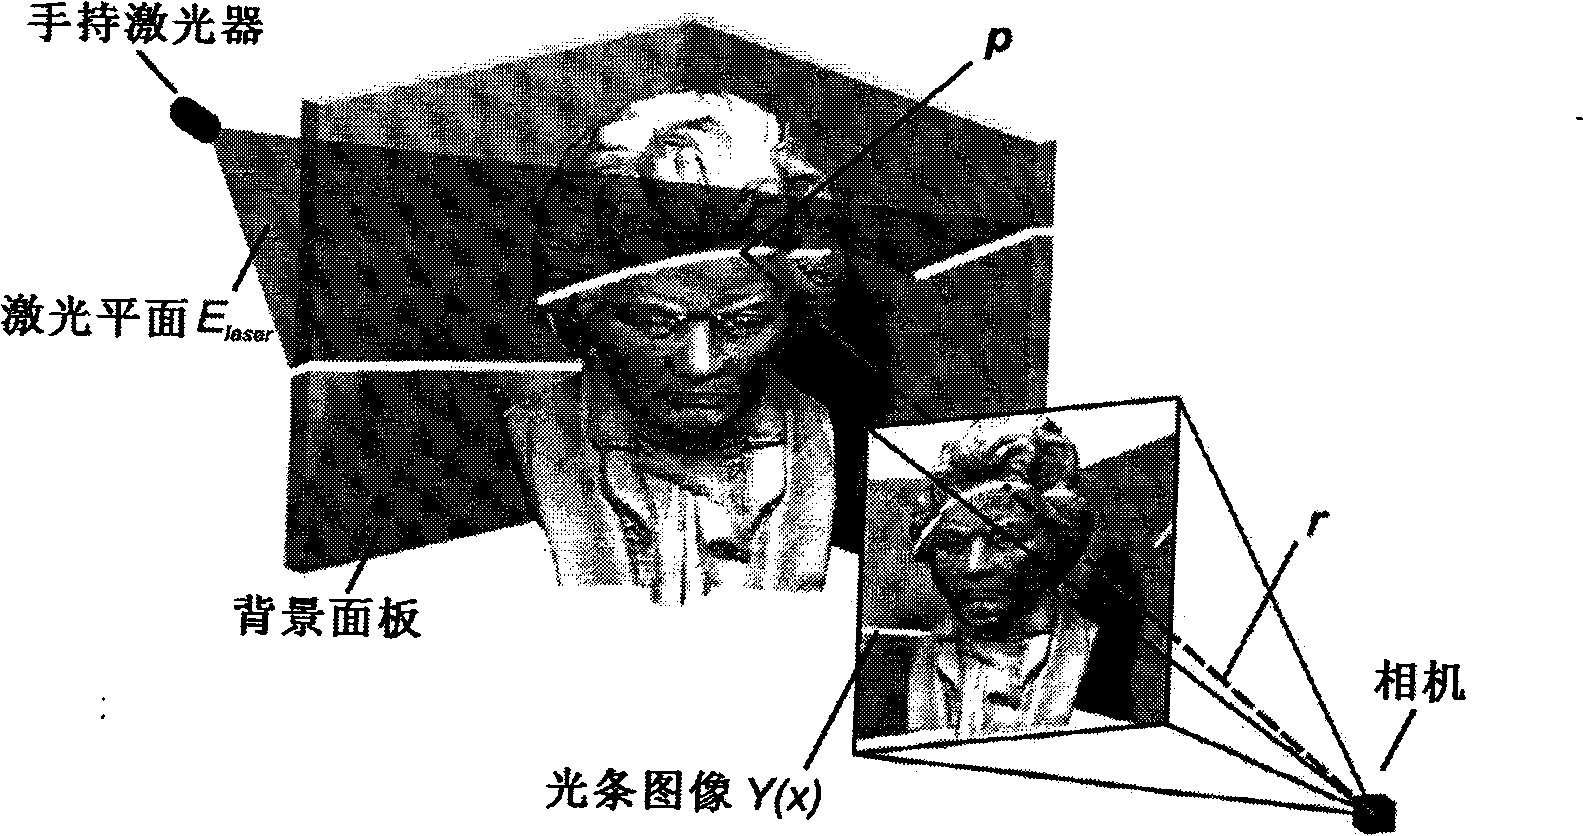 Scanning system and method for three-dimensional images